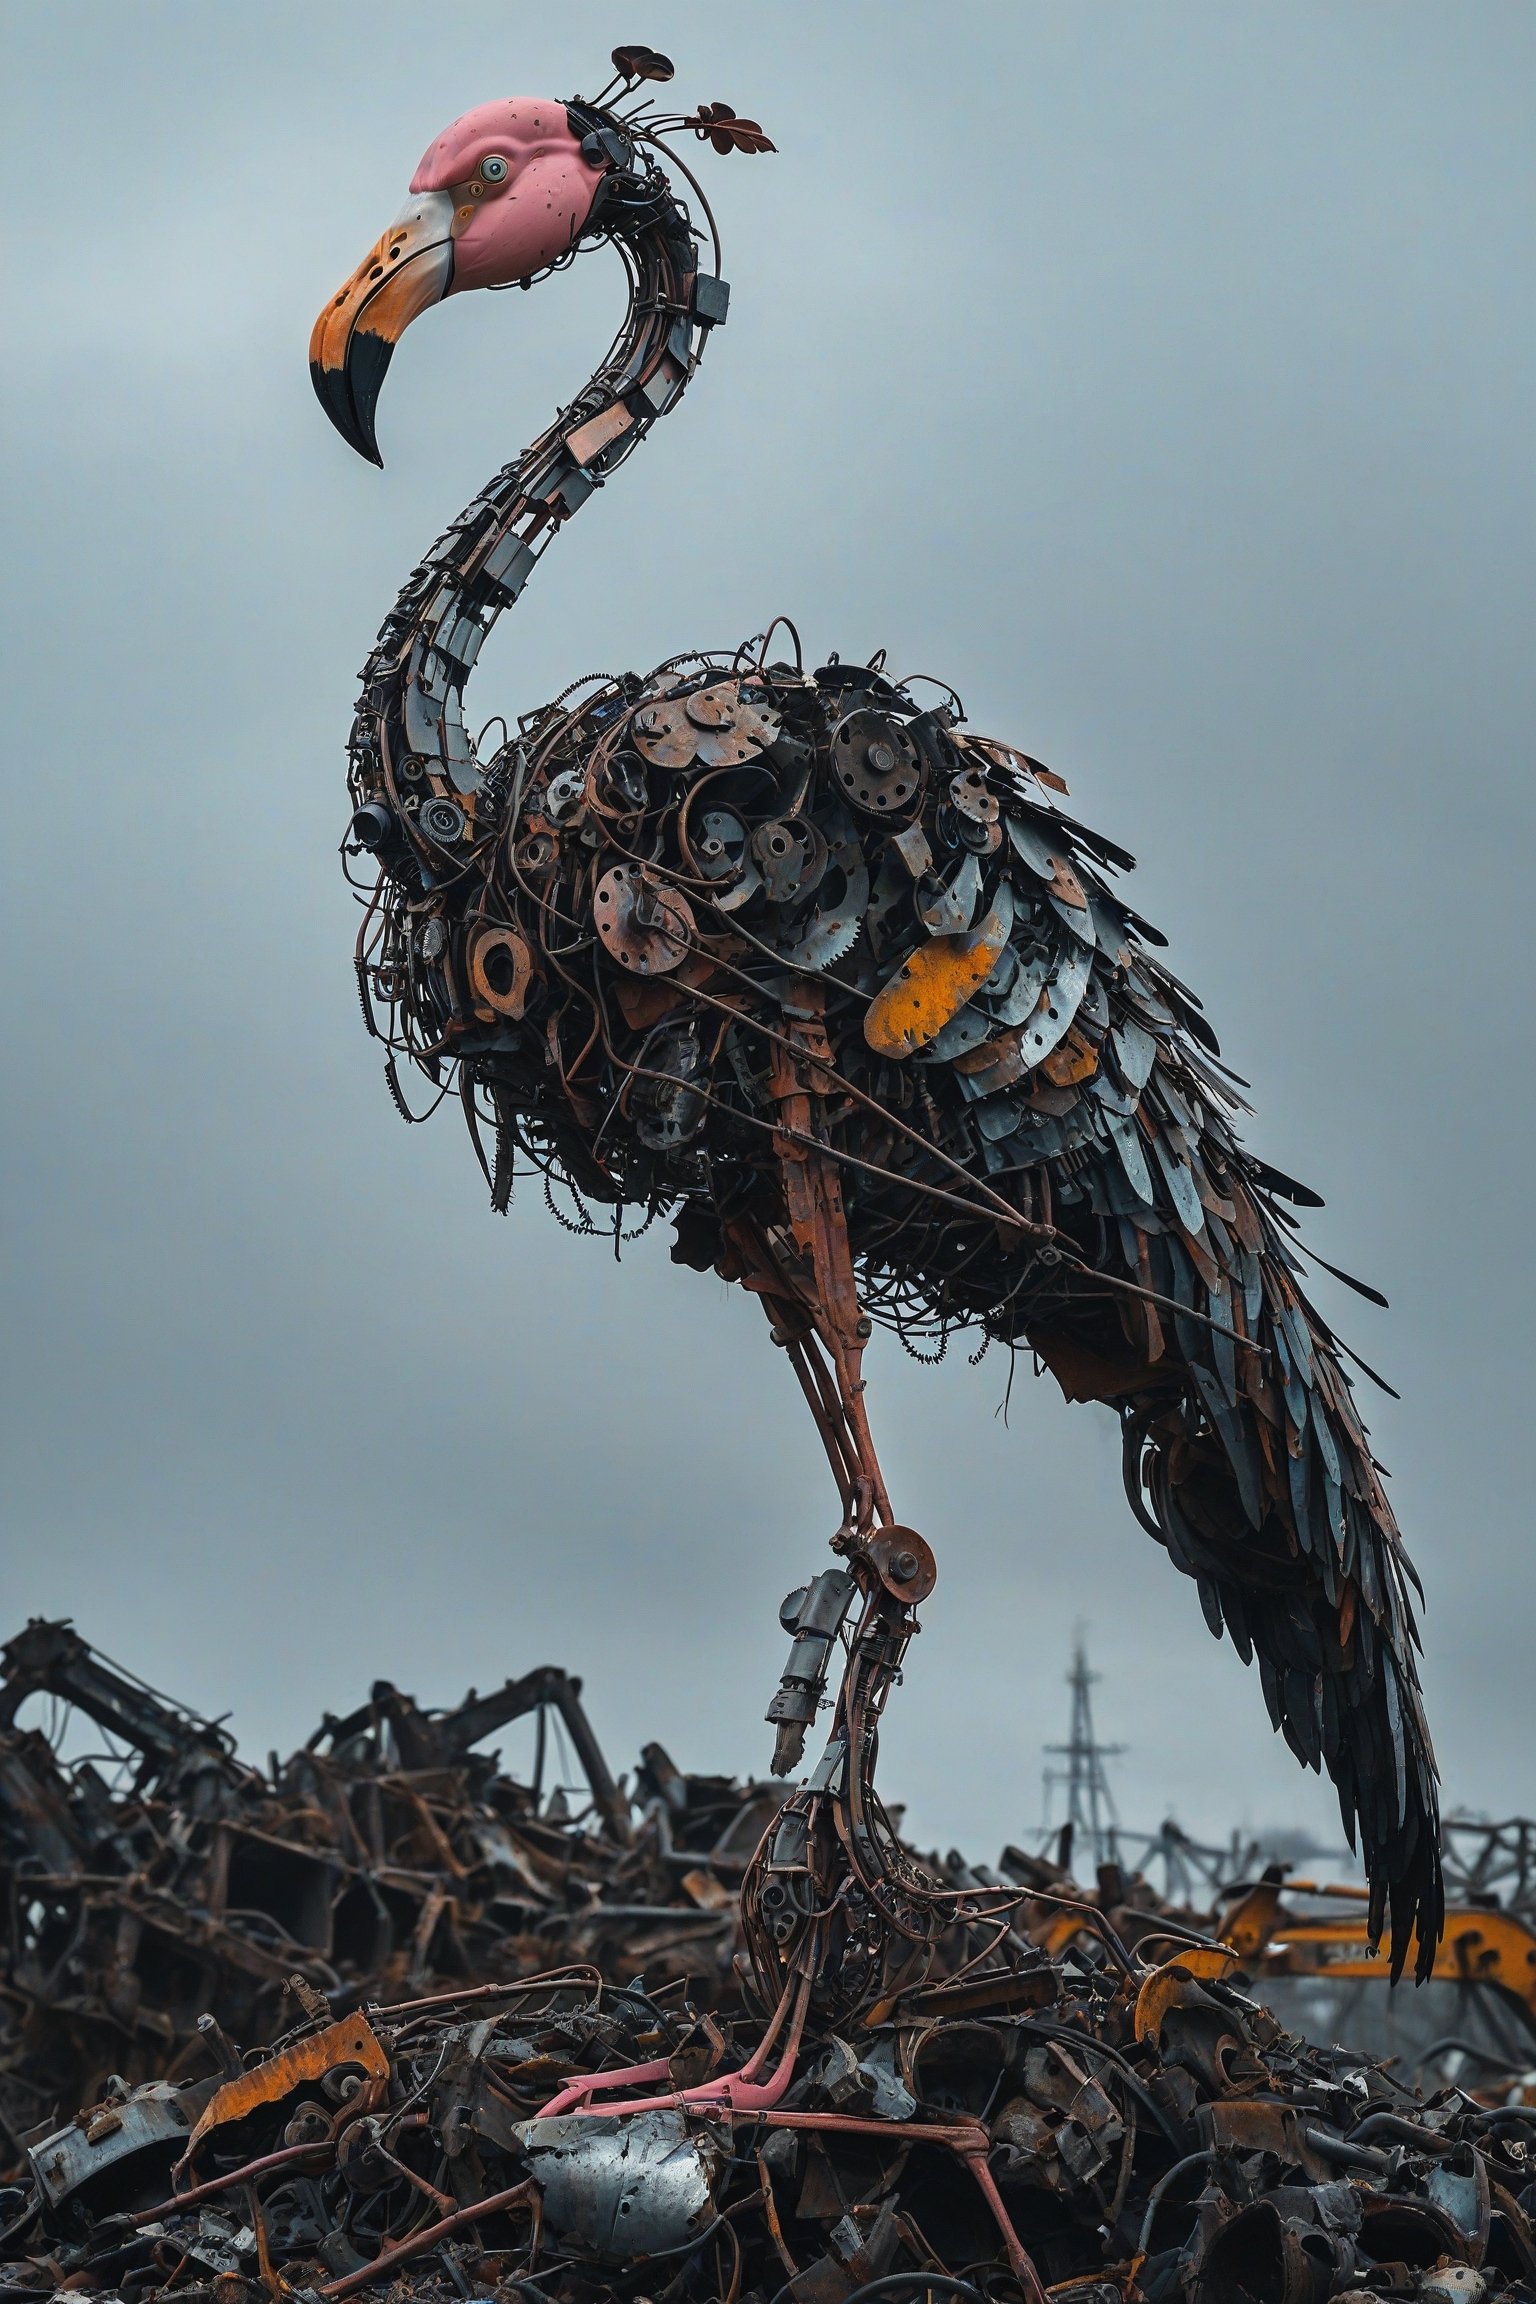 A towering, intricately constructed mechanical flamingo standing atop a mound of discarded metal and debris. The flamingo appears to be made of various metal parts, wires, and tools, giving it a skeletal and mechanical appearance. The background is overcast, adding a somber and post-apocalyptic feel to the scene.
